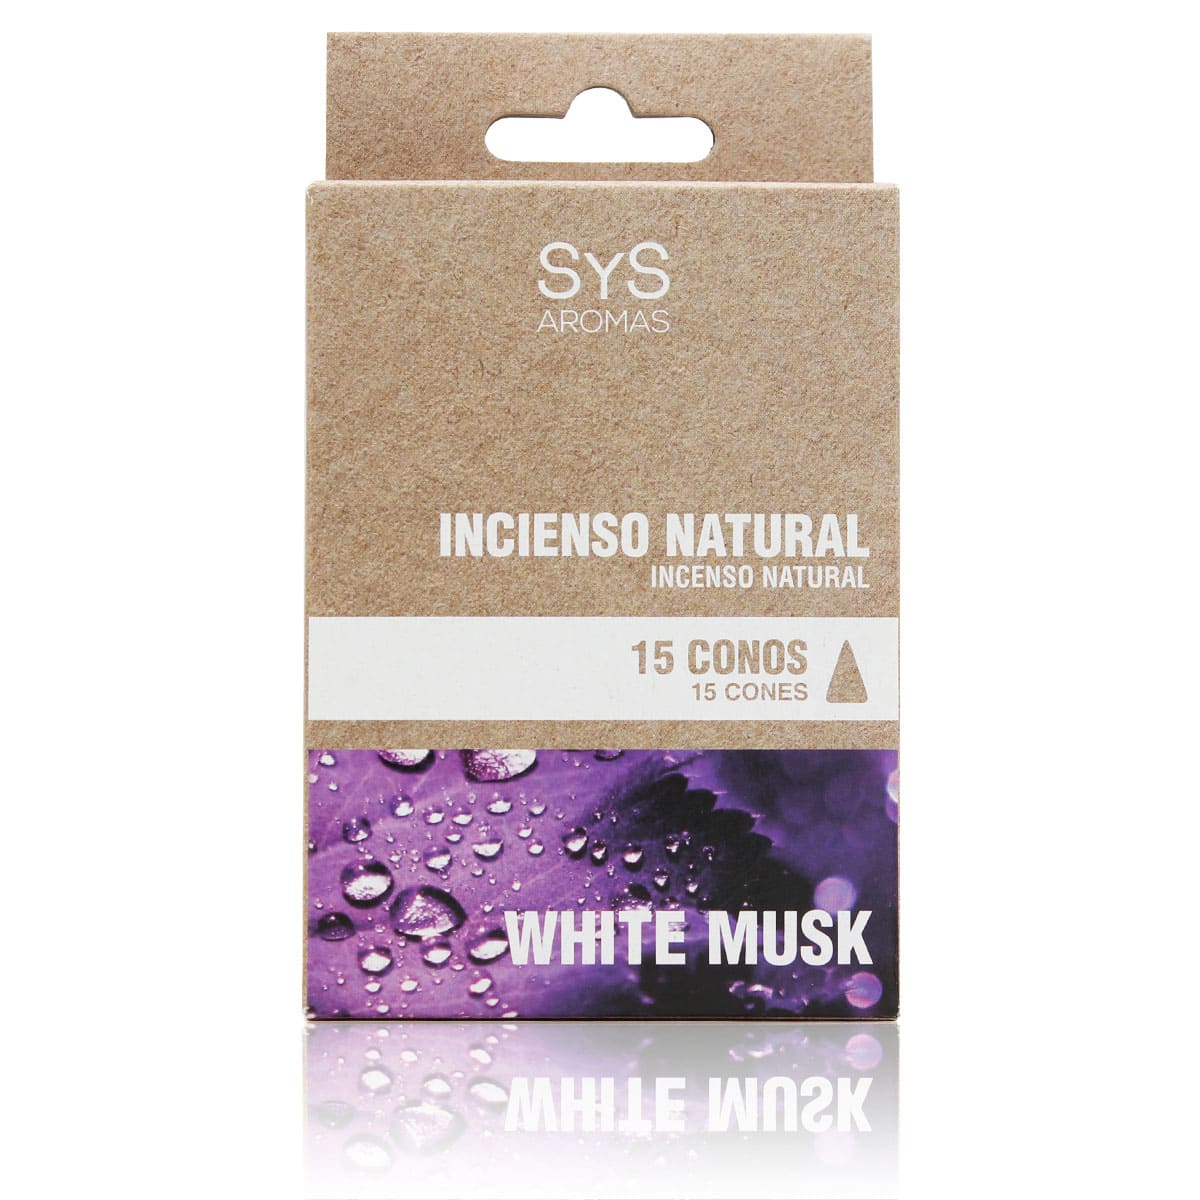 Buy Natural White musk Inciense 15 Cones SYS Aromas